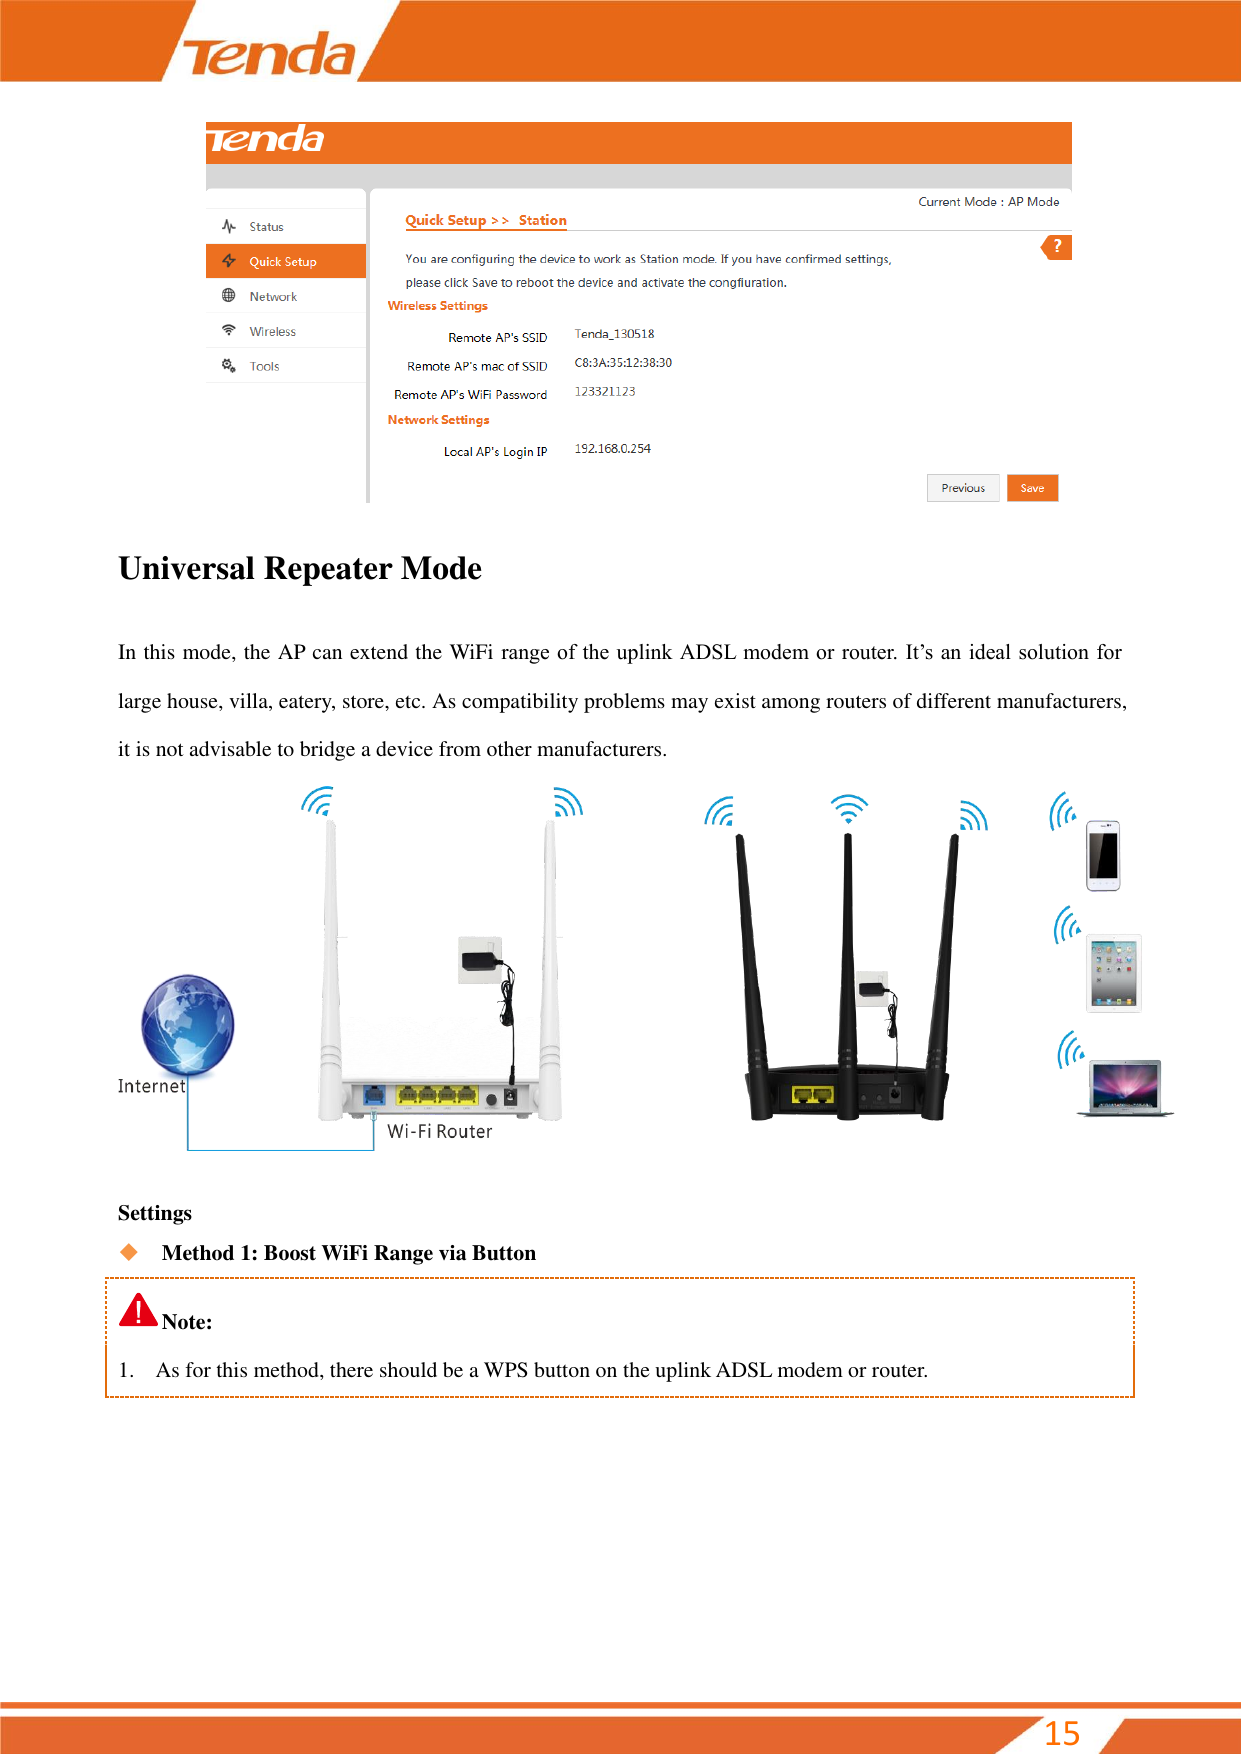         15  Universal Repeater Mode In this mode, the AP can extend the WiFi range of the uplink ADSL modem or router. It’s an ideal solution for large house, villa, eatery, store, etc. As compatibility problems may exist among routers of different manufacturers, it is not advisable to bridge a device from other manufacturers.   Settings    Method 1: Boost WiFi Range via Button Note: 1. As for this method, there should be a WPS button on the uplink ADSL modem or router.       